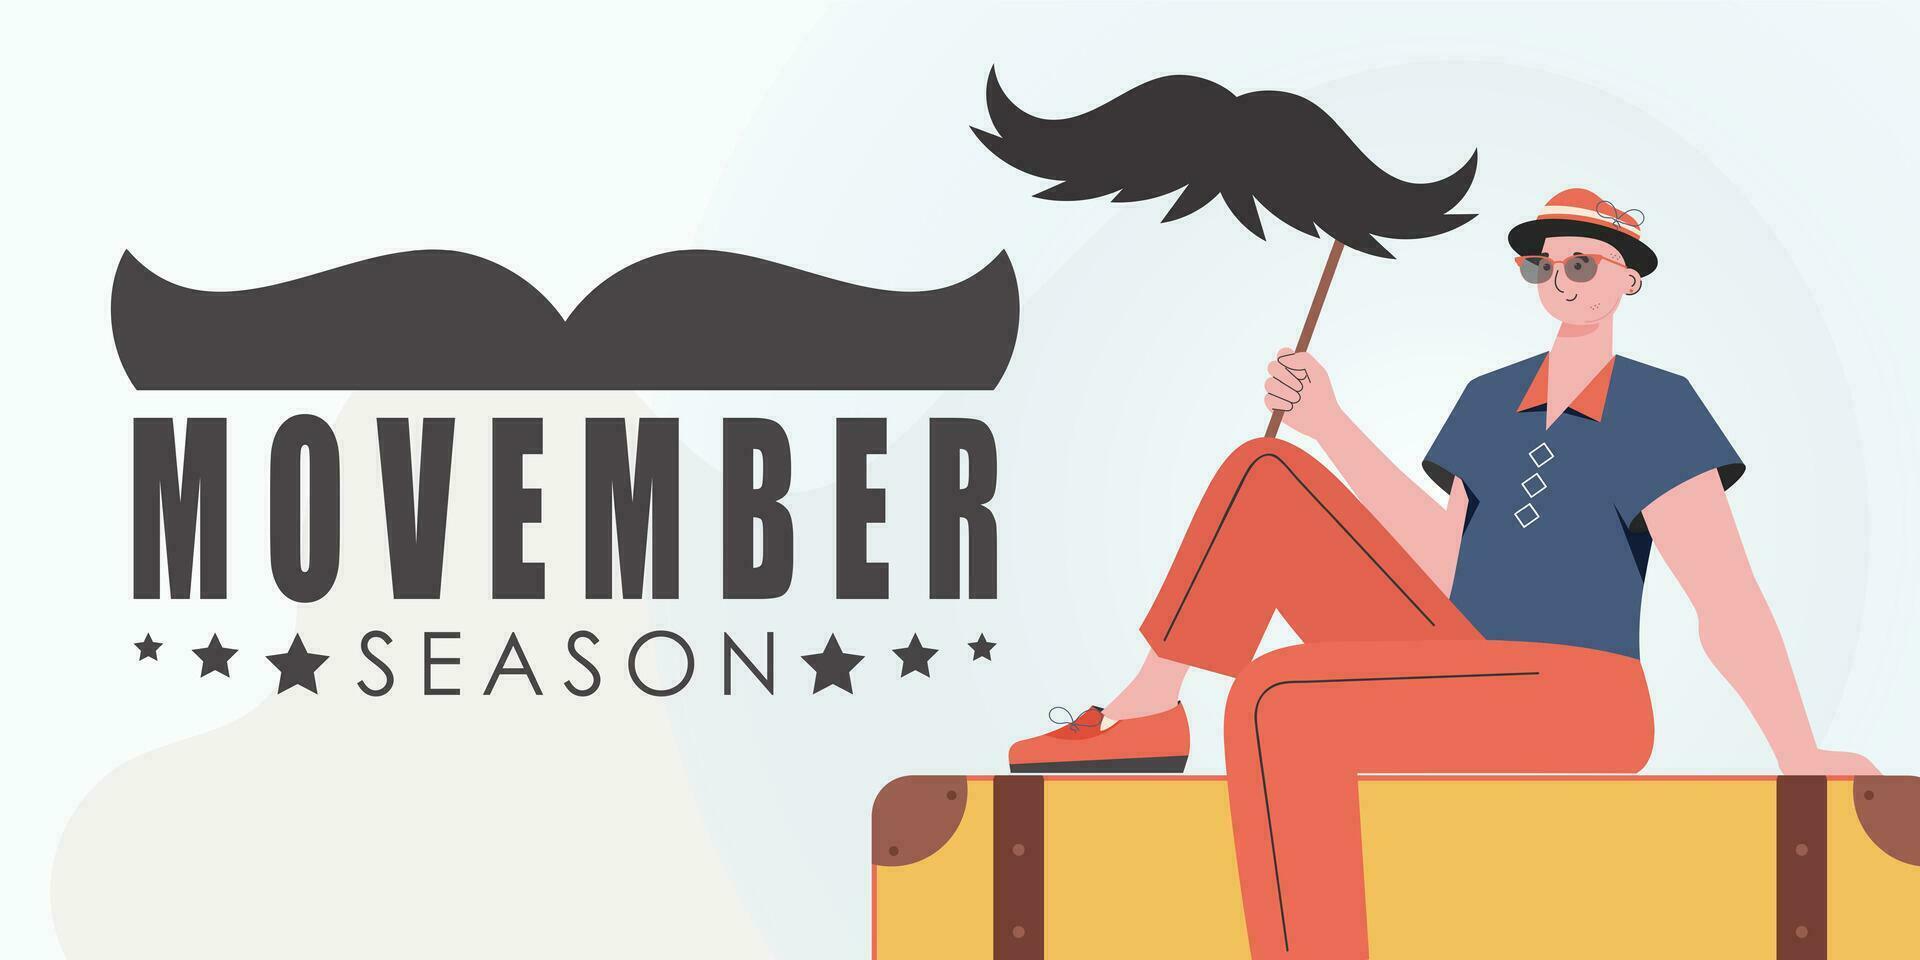 Movember poster. A man holds a mustache on a stick. Trendy cartoon style. Vector illustration.